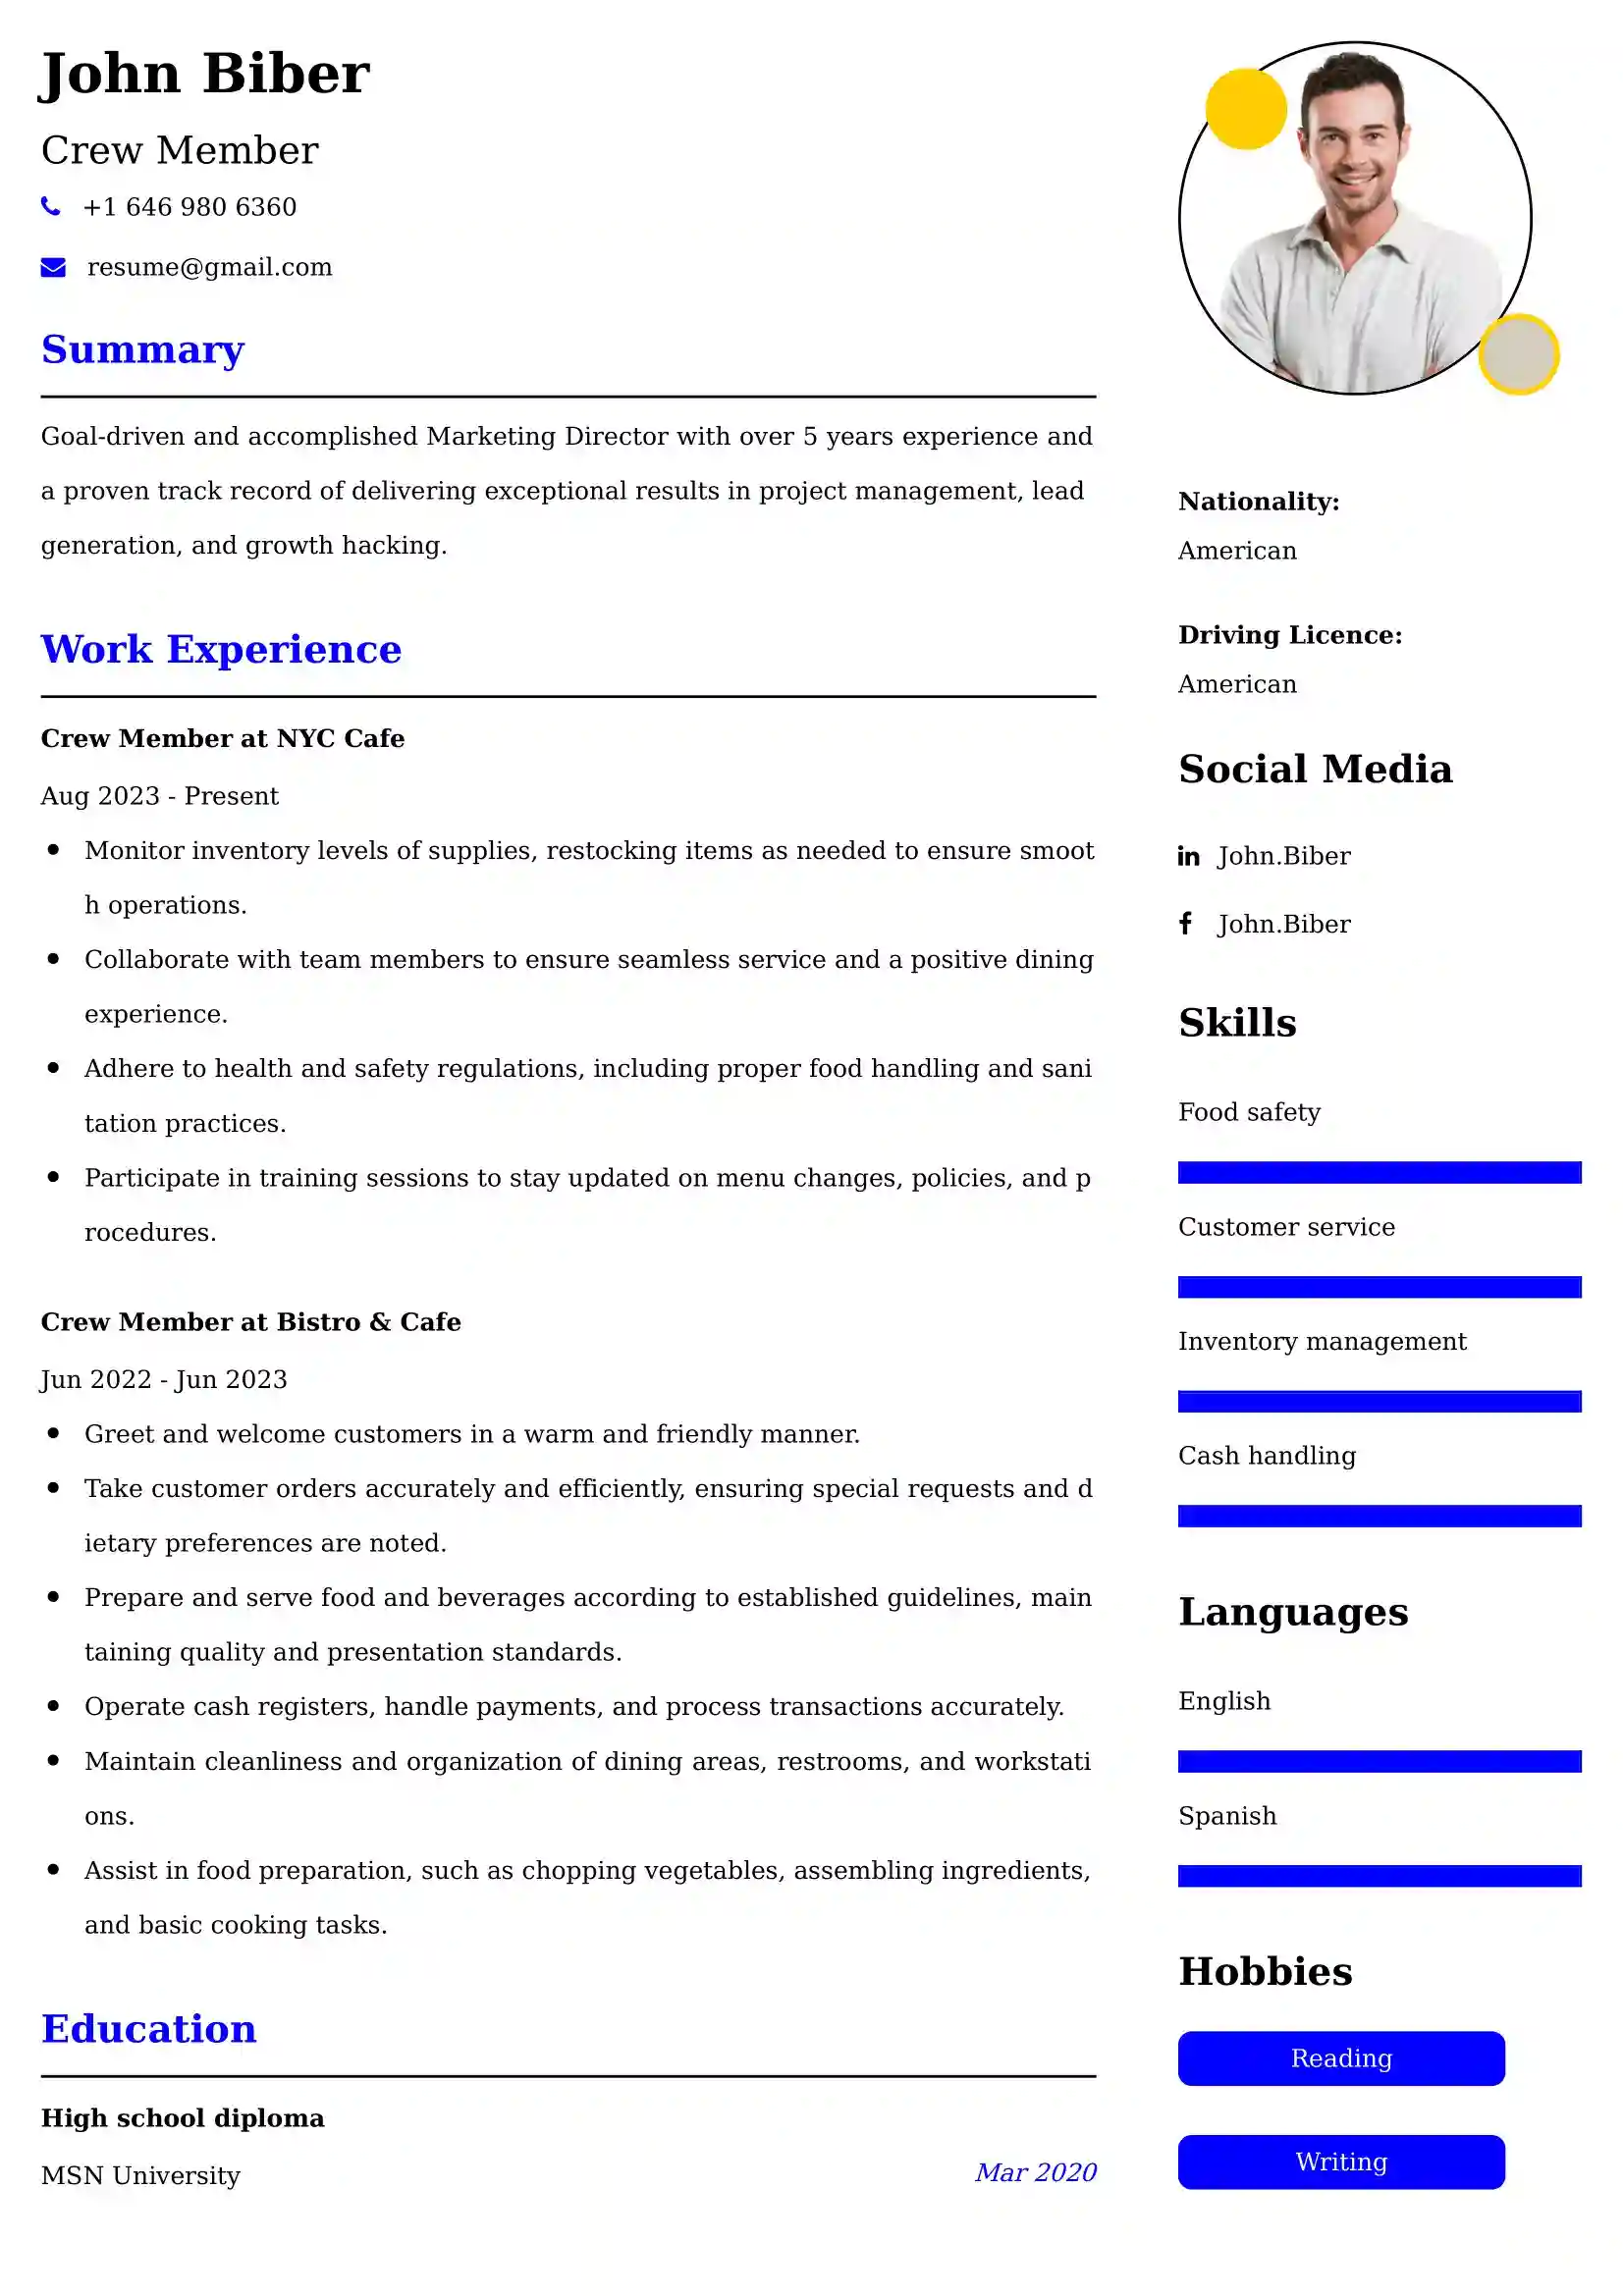 75+ Professional Food Service Resume Examples, Latest Format